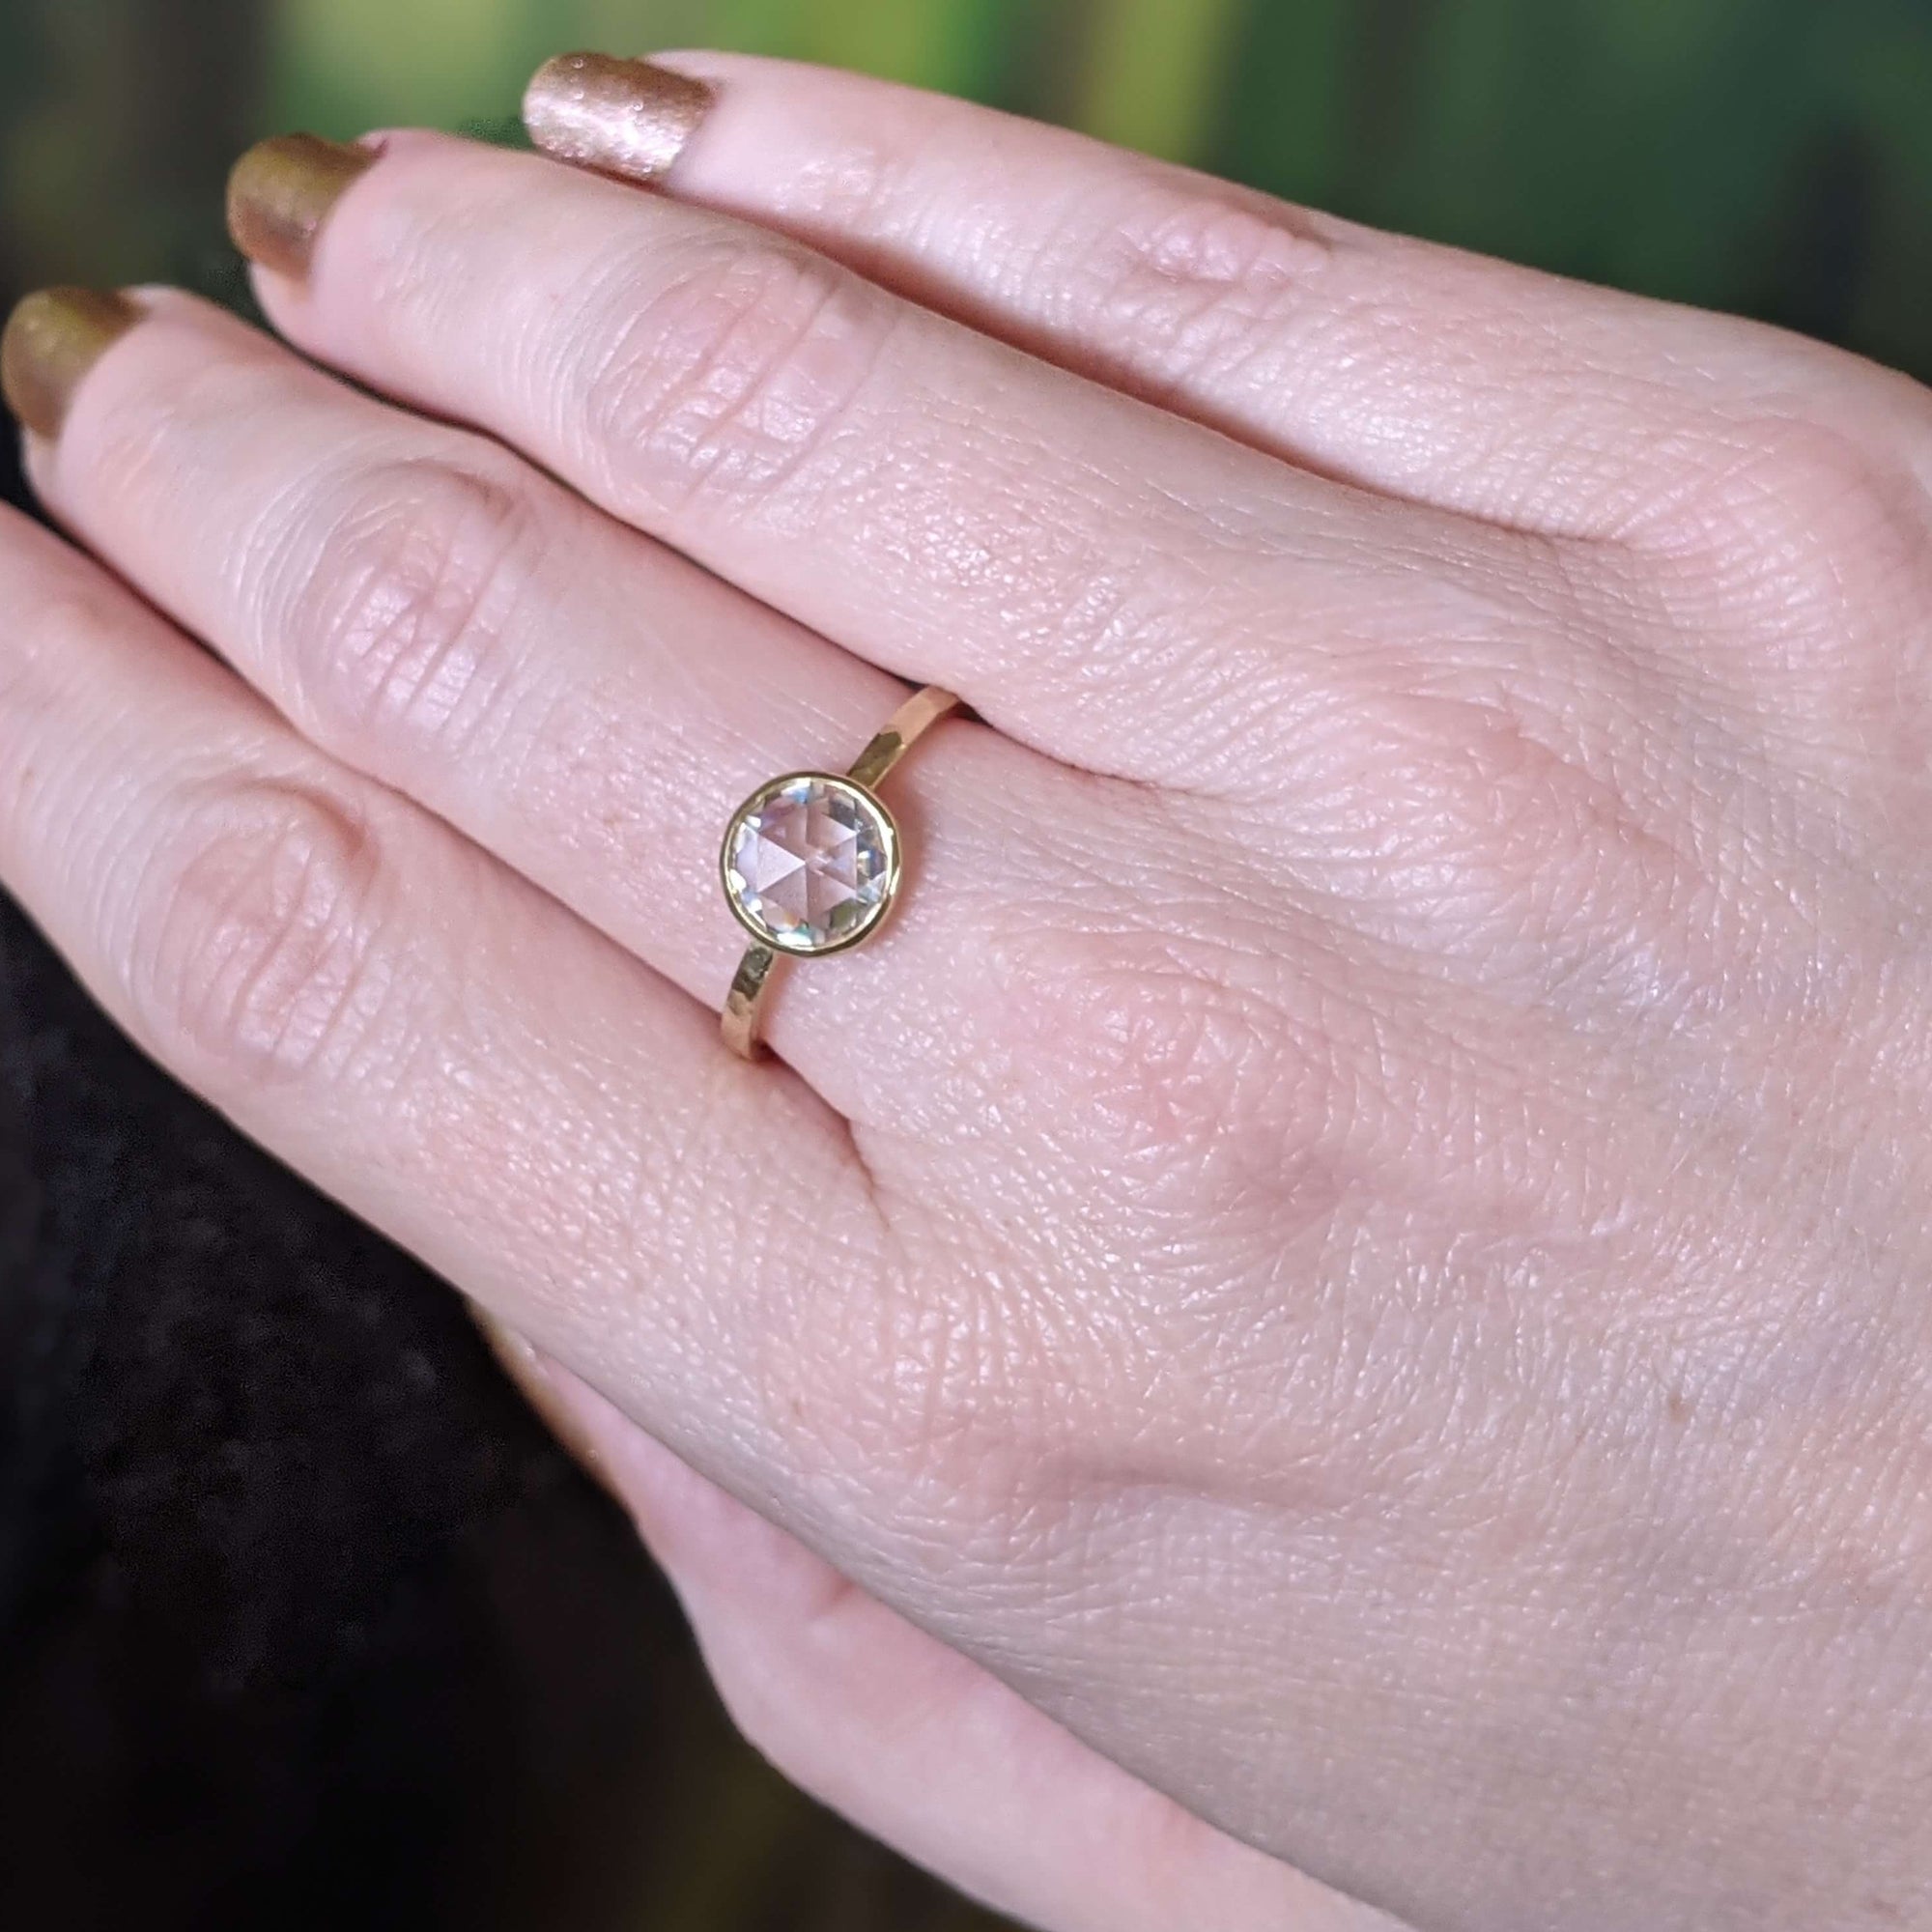 Rose cut Moissanite engagement ring in hammered yellow gold. A beautiful ring handmade by EC Design in Minneapolis, MN using recycled metal and conflict-free stone.